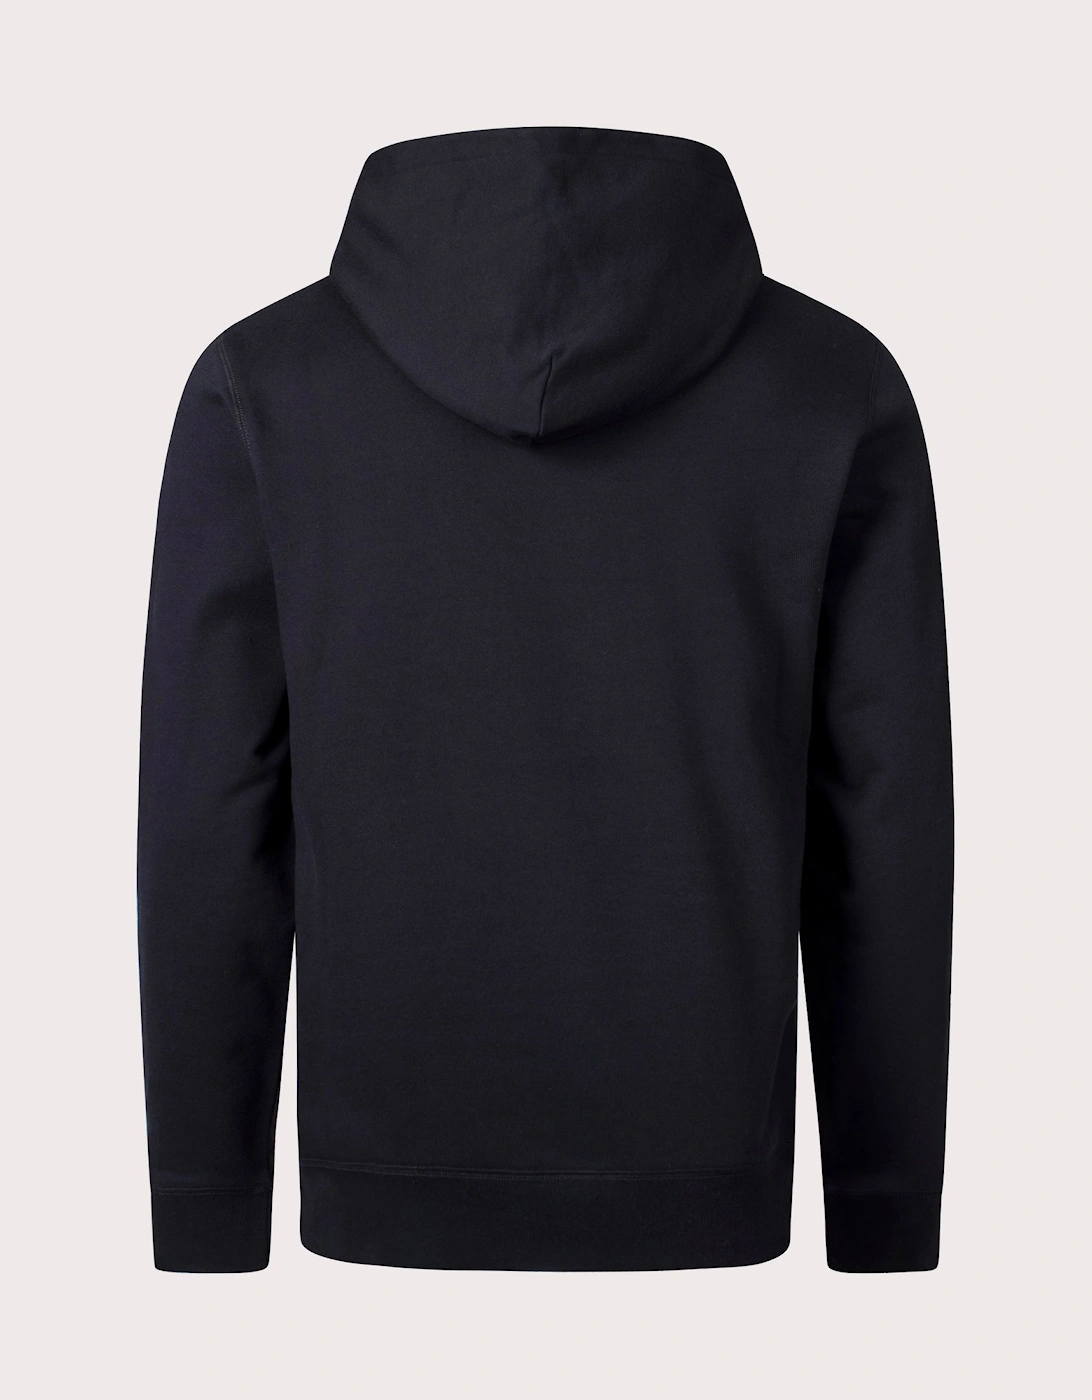 Small Arch Logo Hoodie